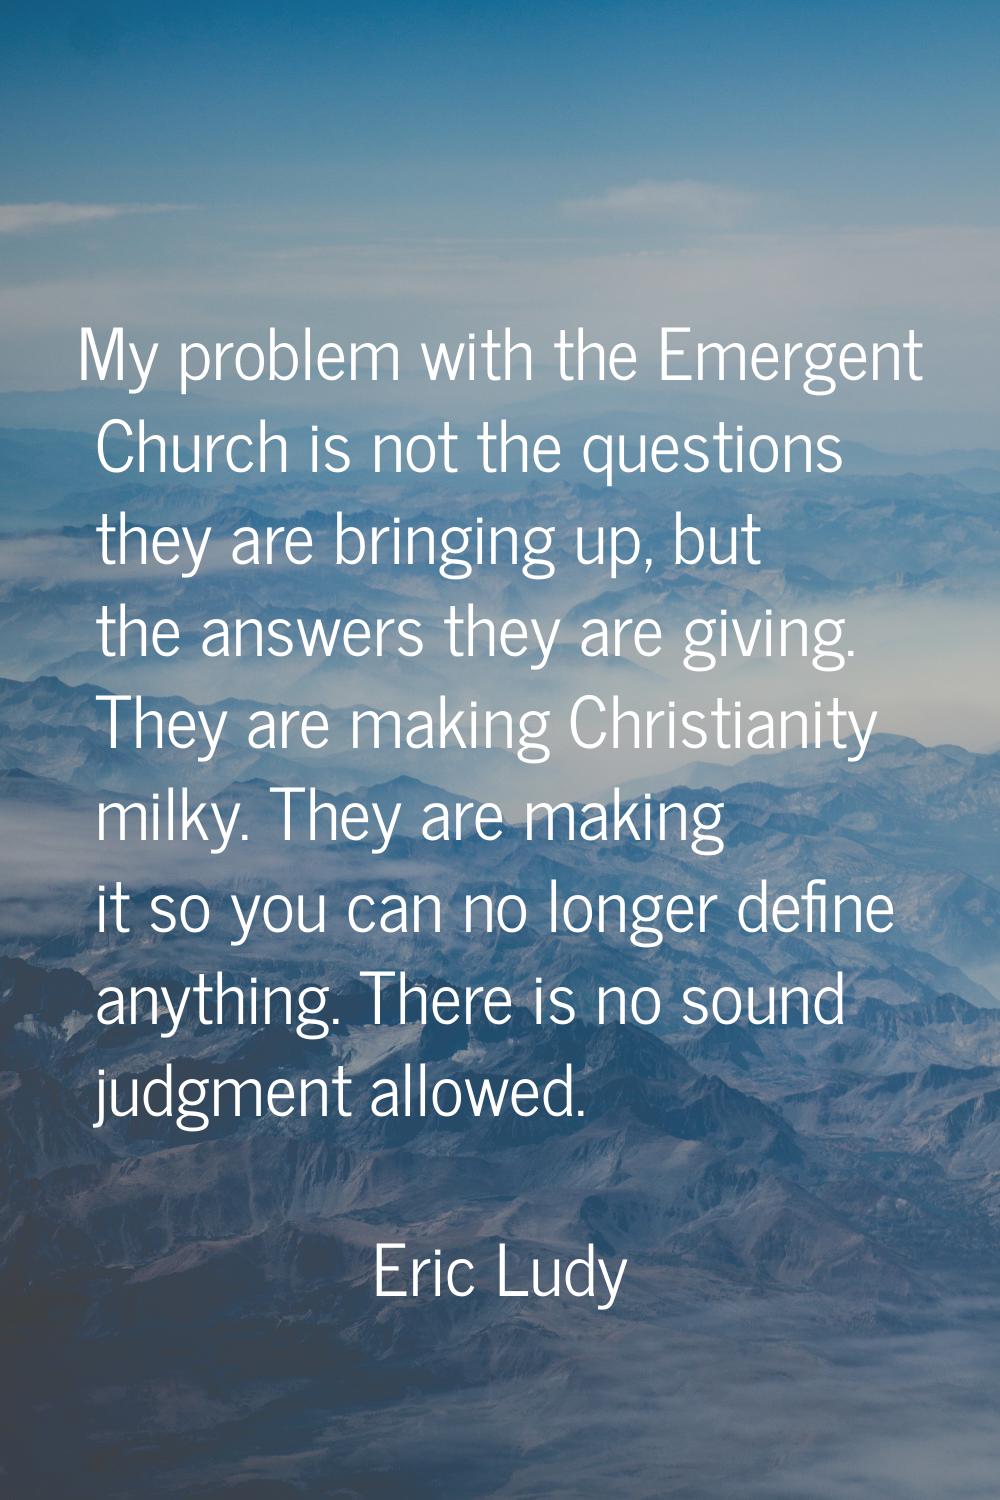 My problem with the Emergent Church is not the questions they are bringing up, but the answers they